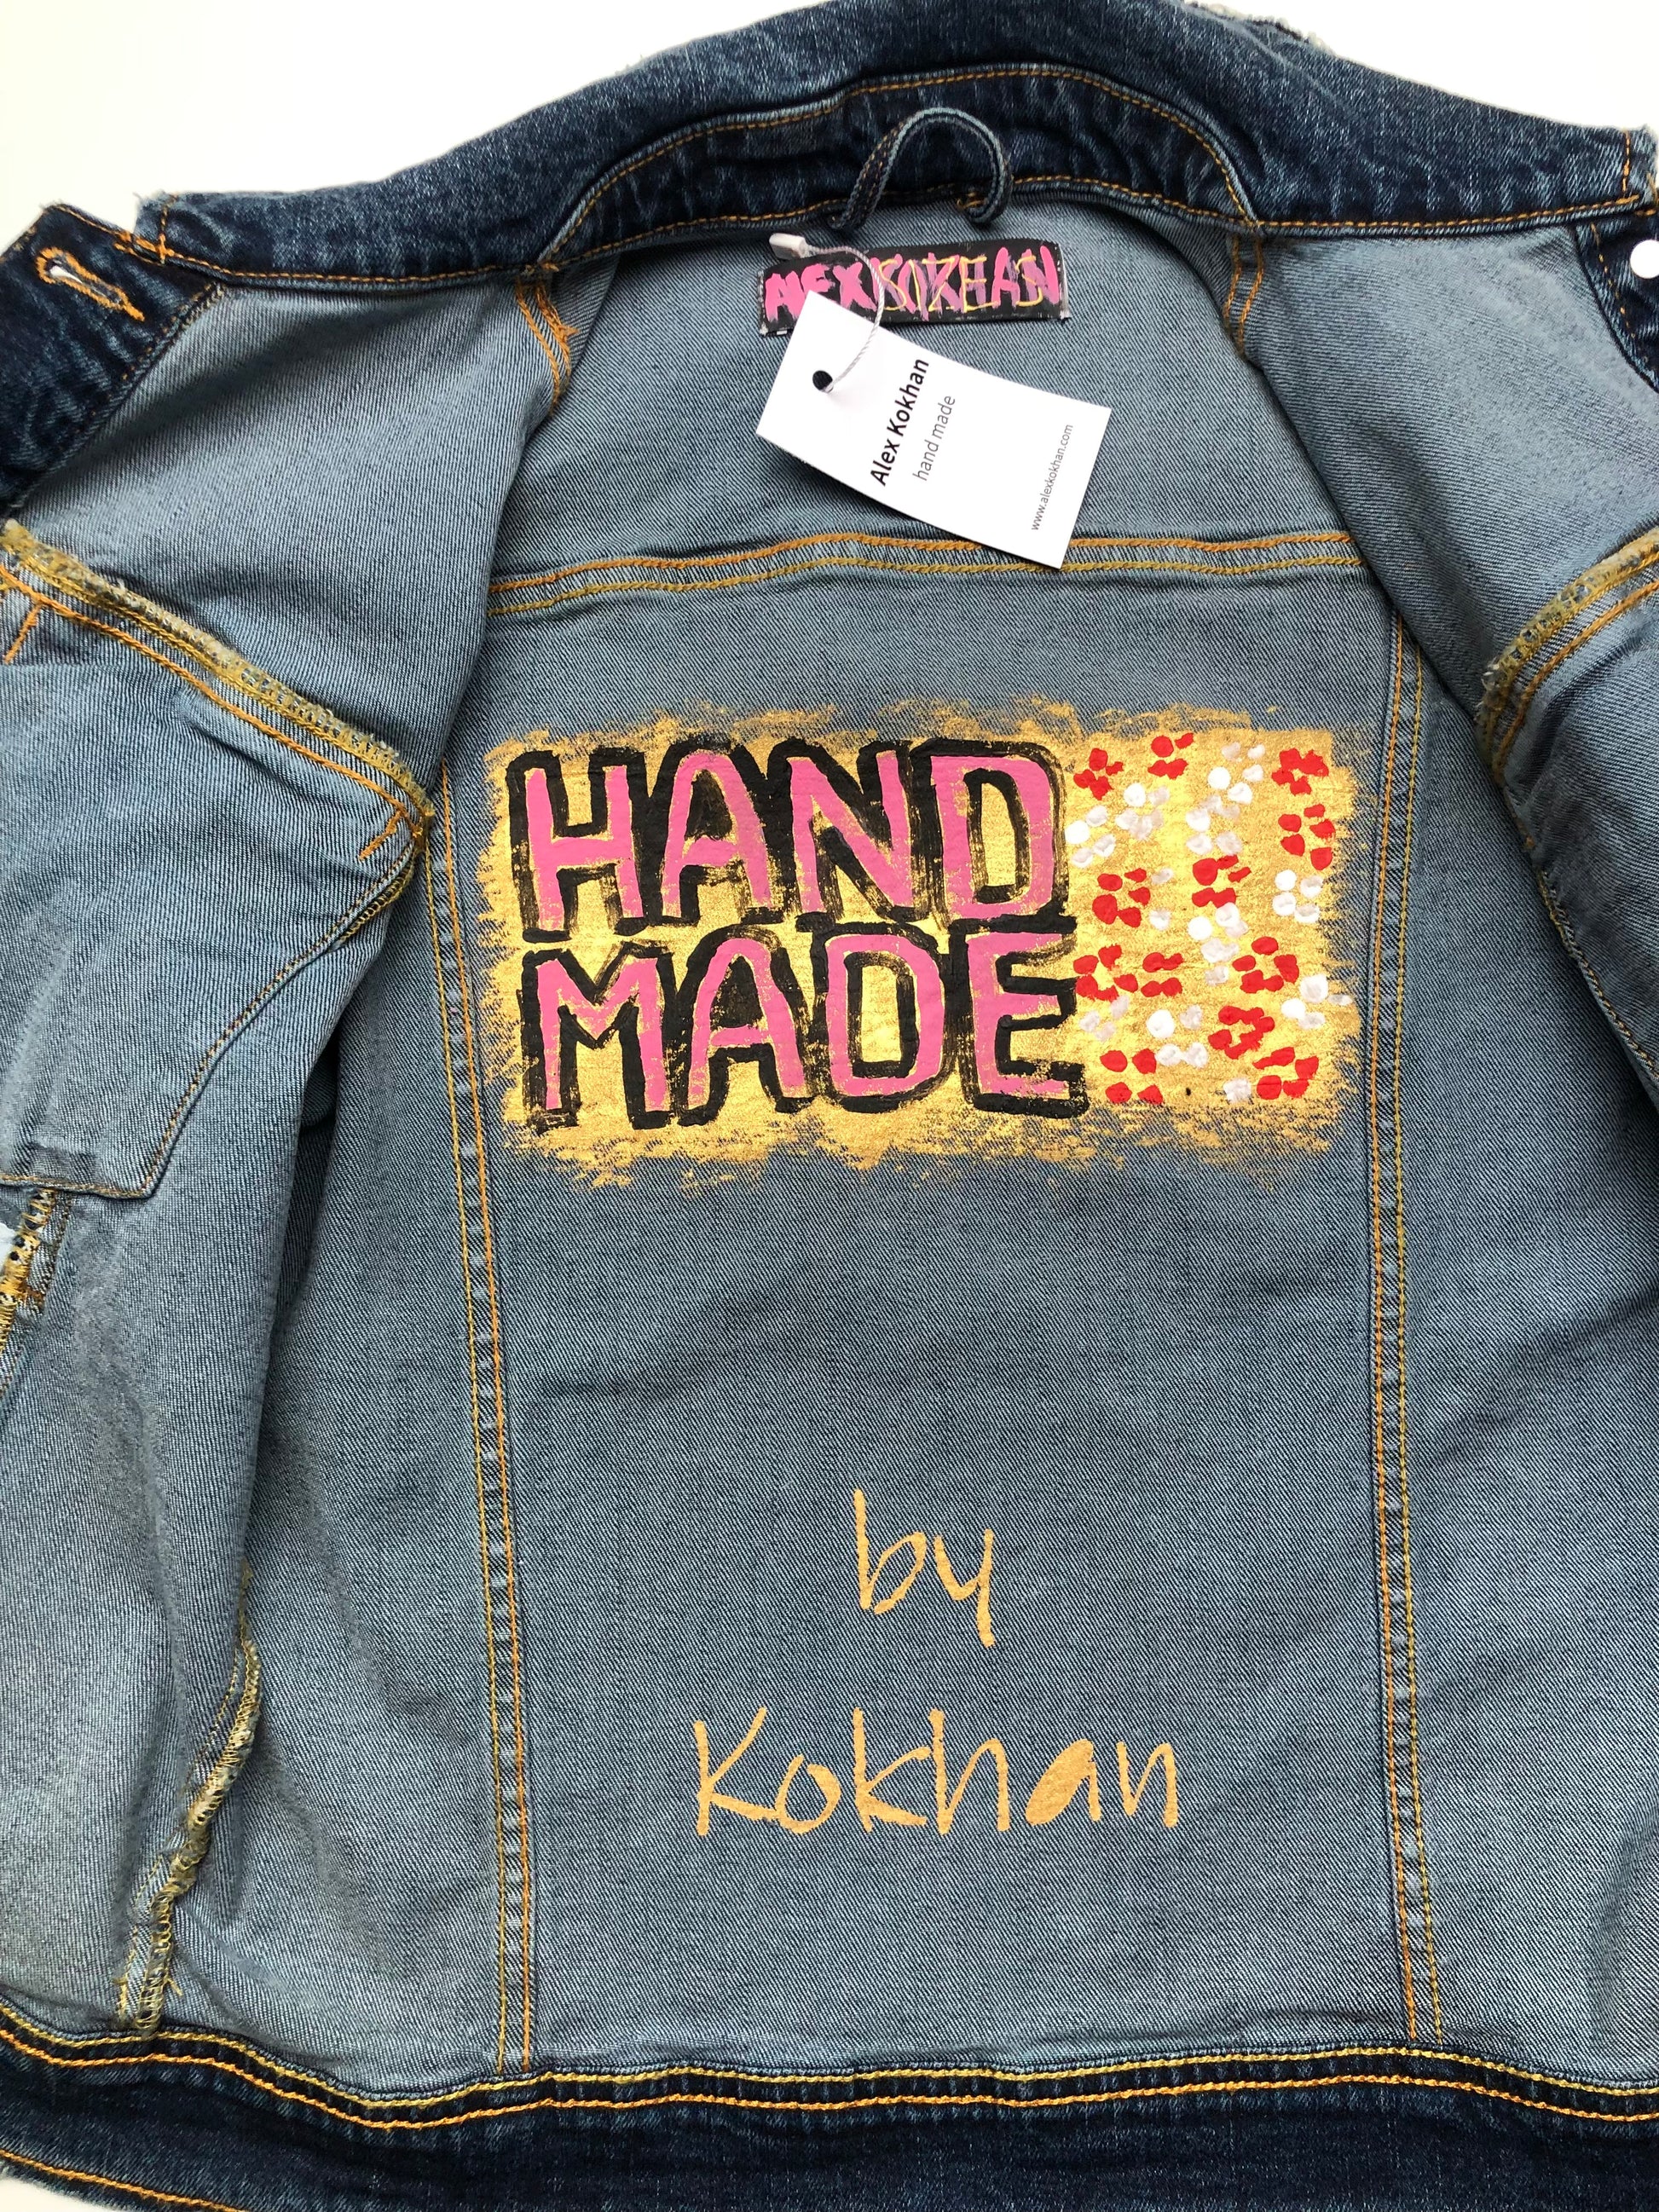 Painting on the inside of a women's denim jacket